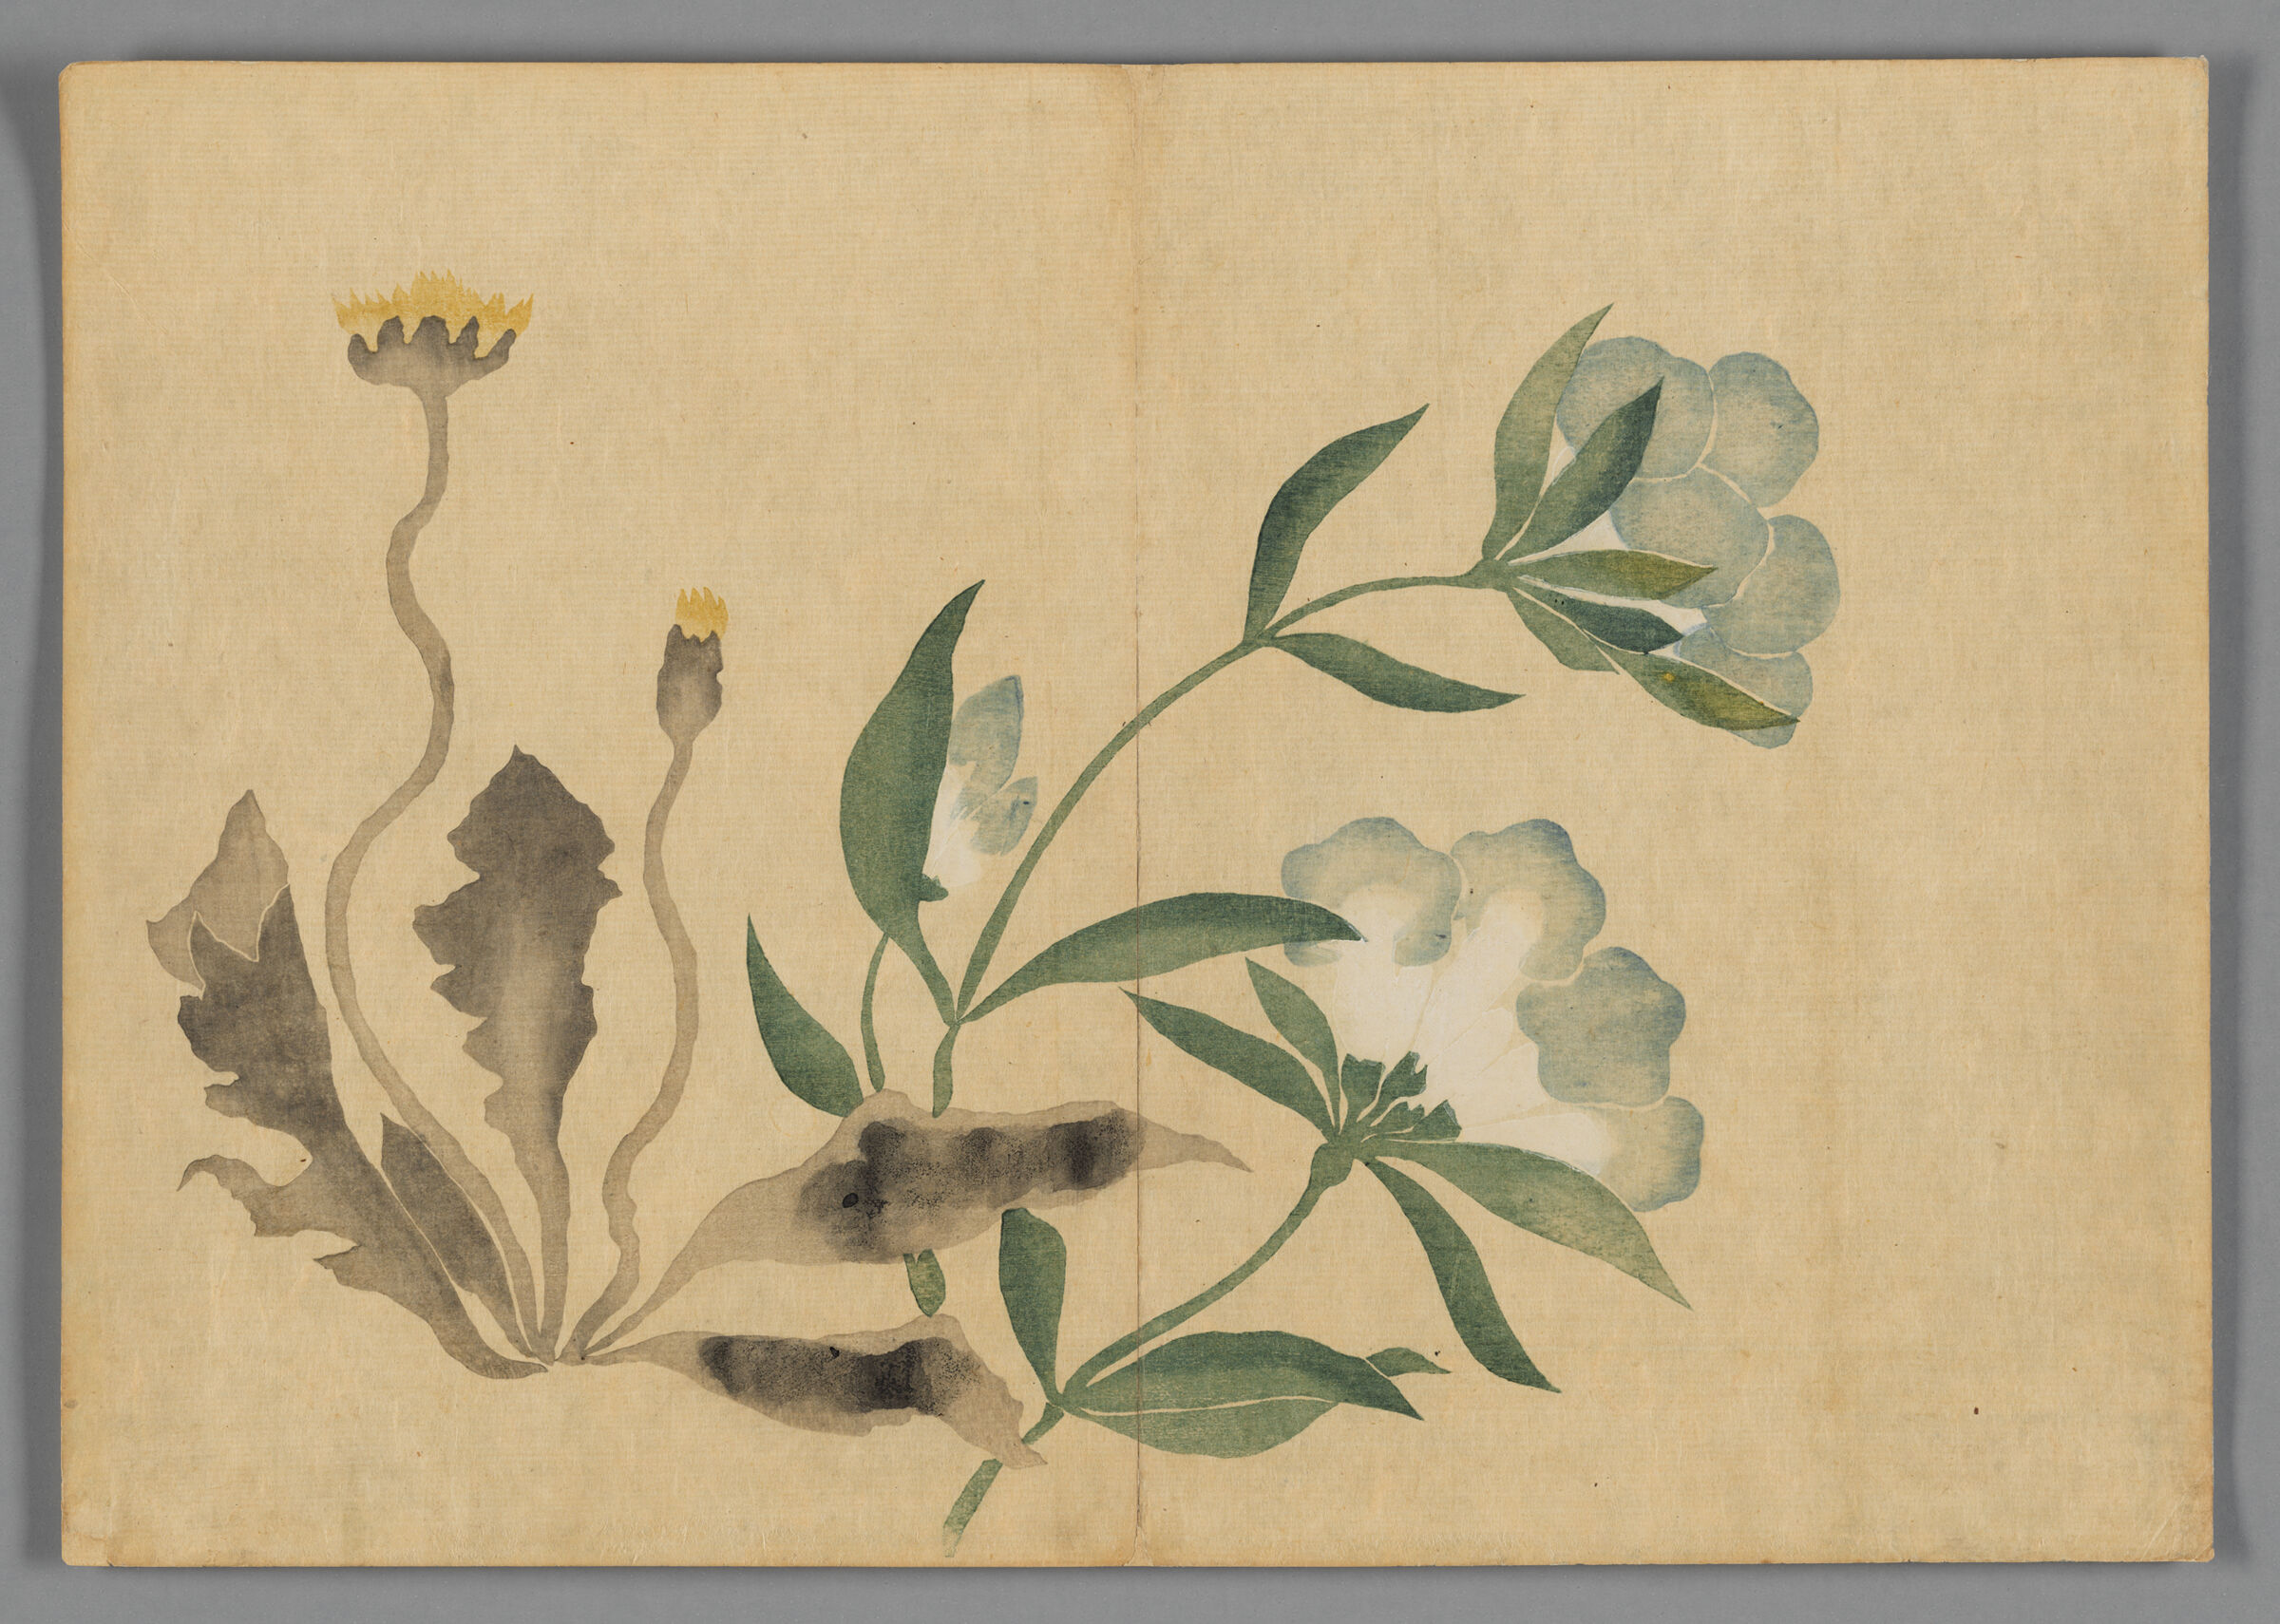 Dandelions And Flowers, From The Kōrin Gafu (Kōrin Picture Album)